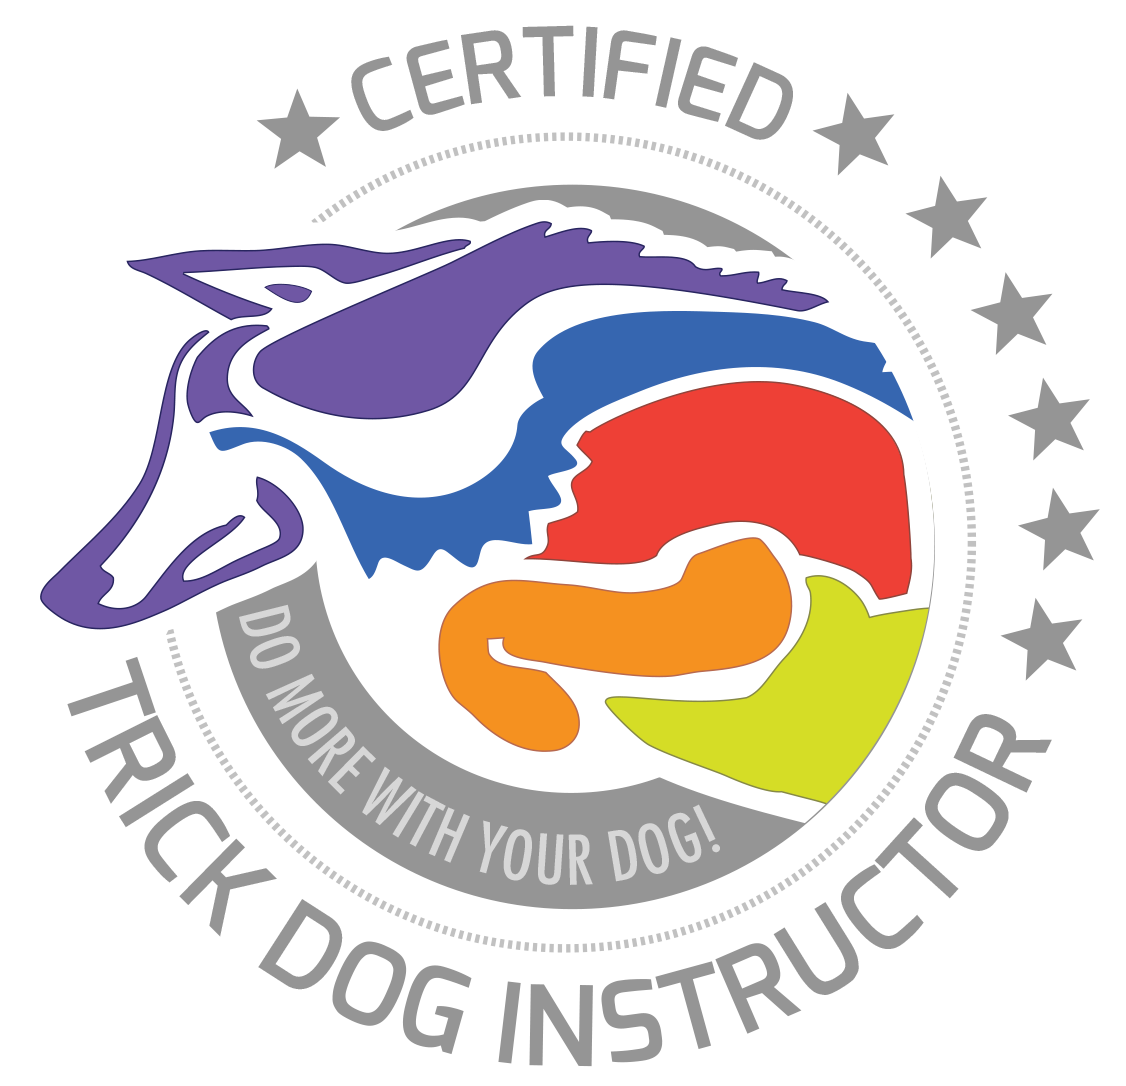 Logo for Certified Trick Dog Instructor: A dog jumping through a hoop in bold, vibrant colors, with the text "Do More with Your Dog - Certified Trick Dog Instructor."